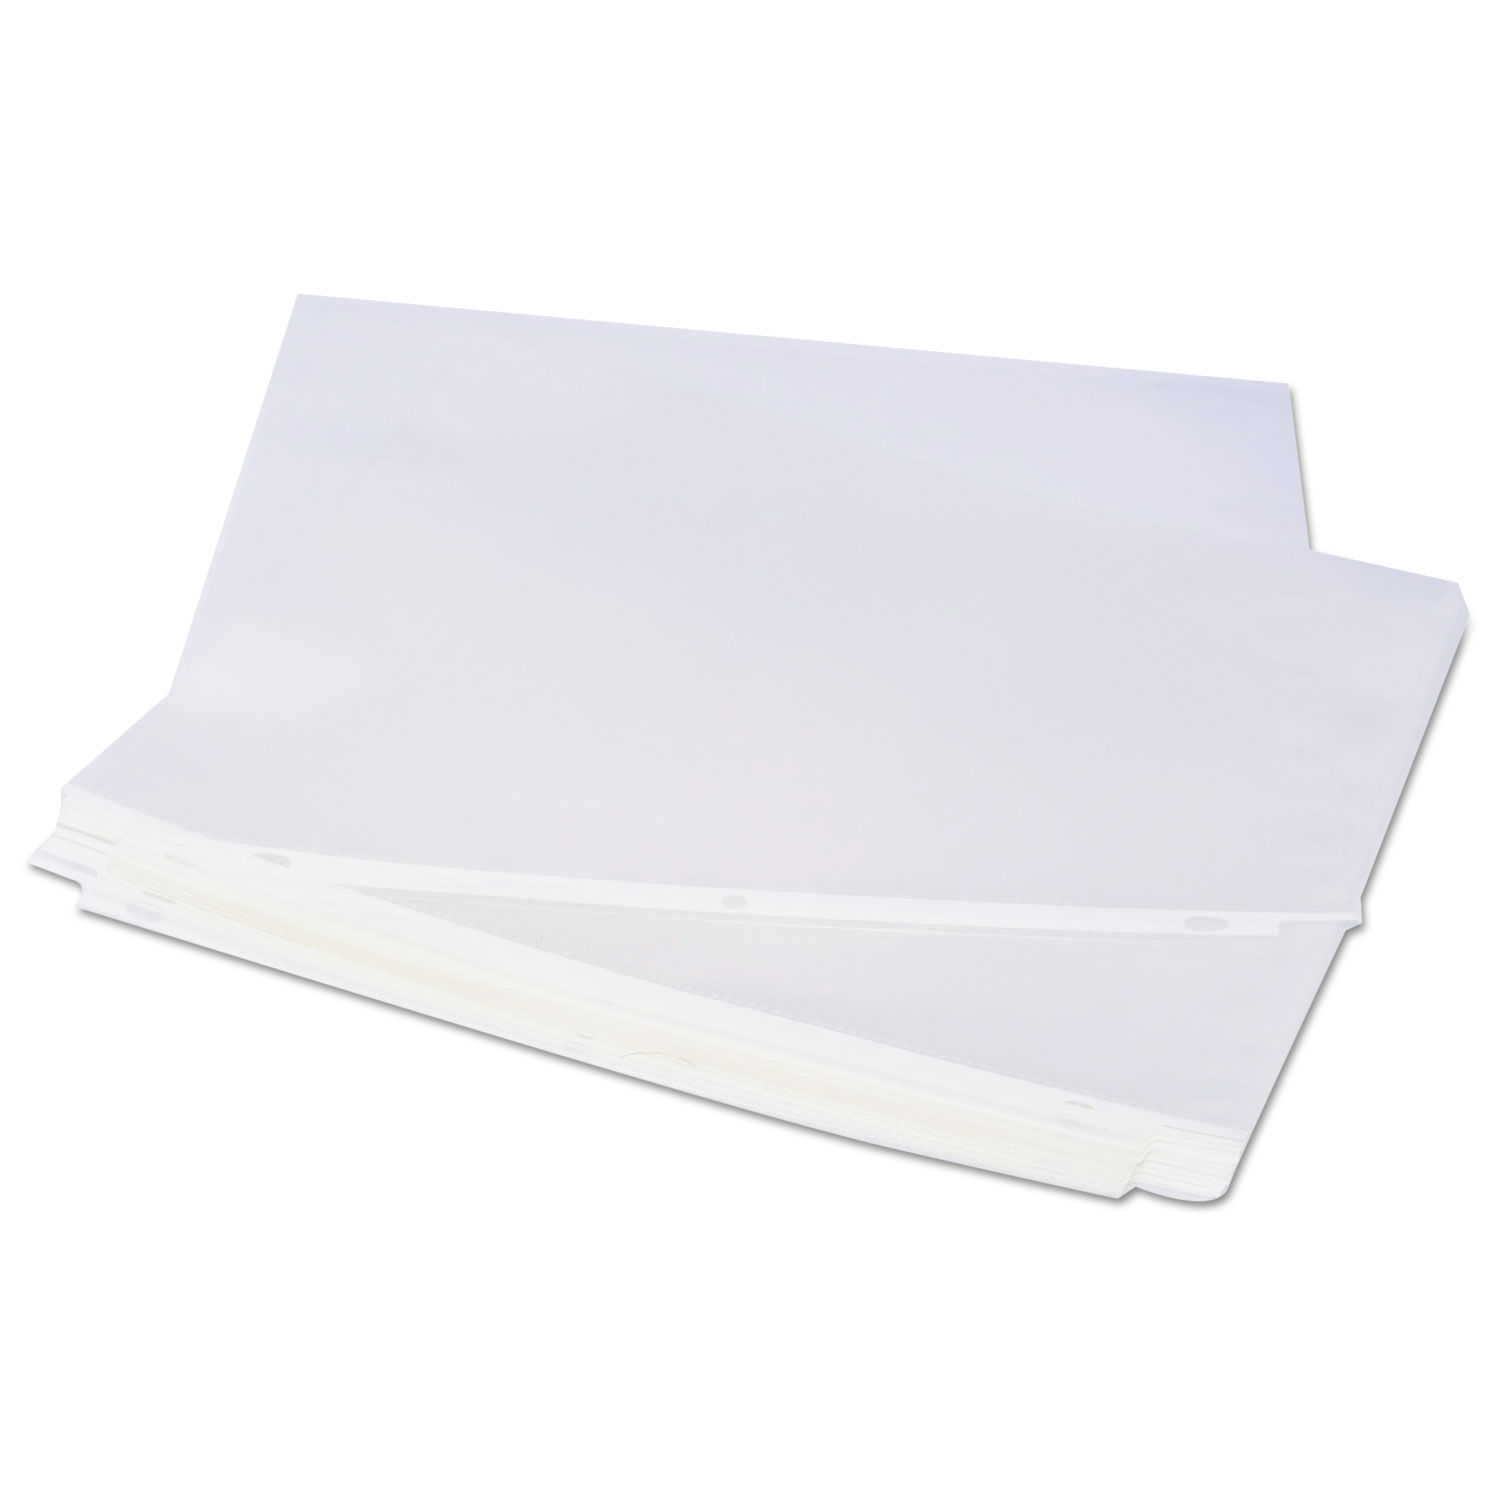 Standard Sheet Protector by Universal® UNV21123